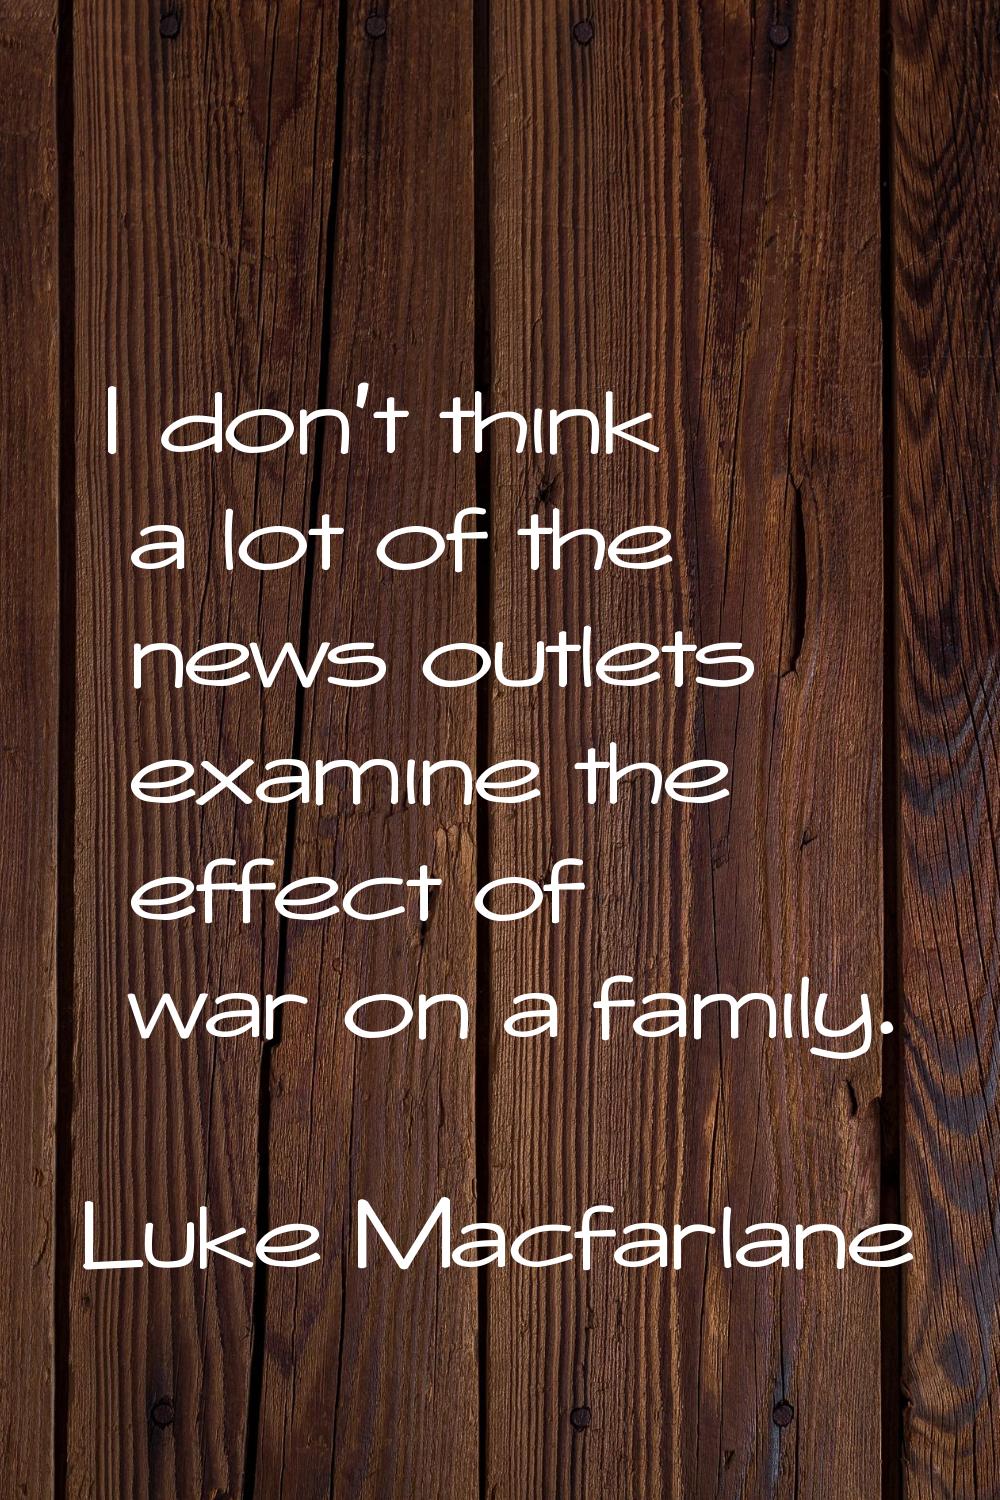 I don't think a lot of the news outlets examine the effect of war on a family.